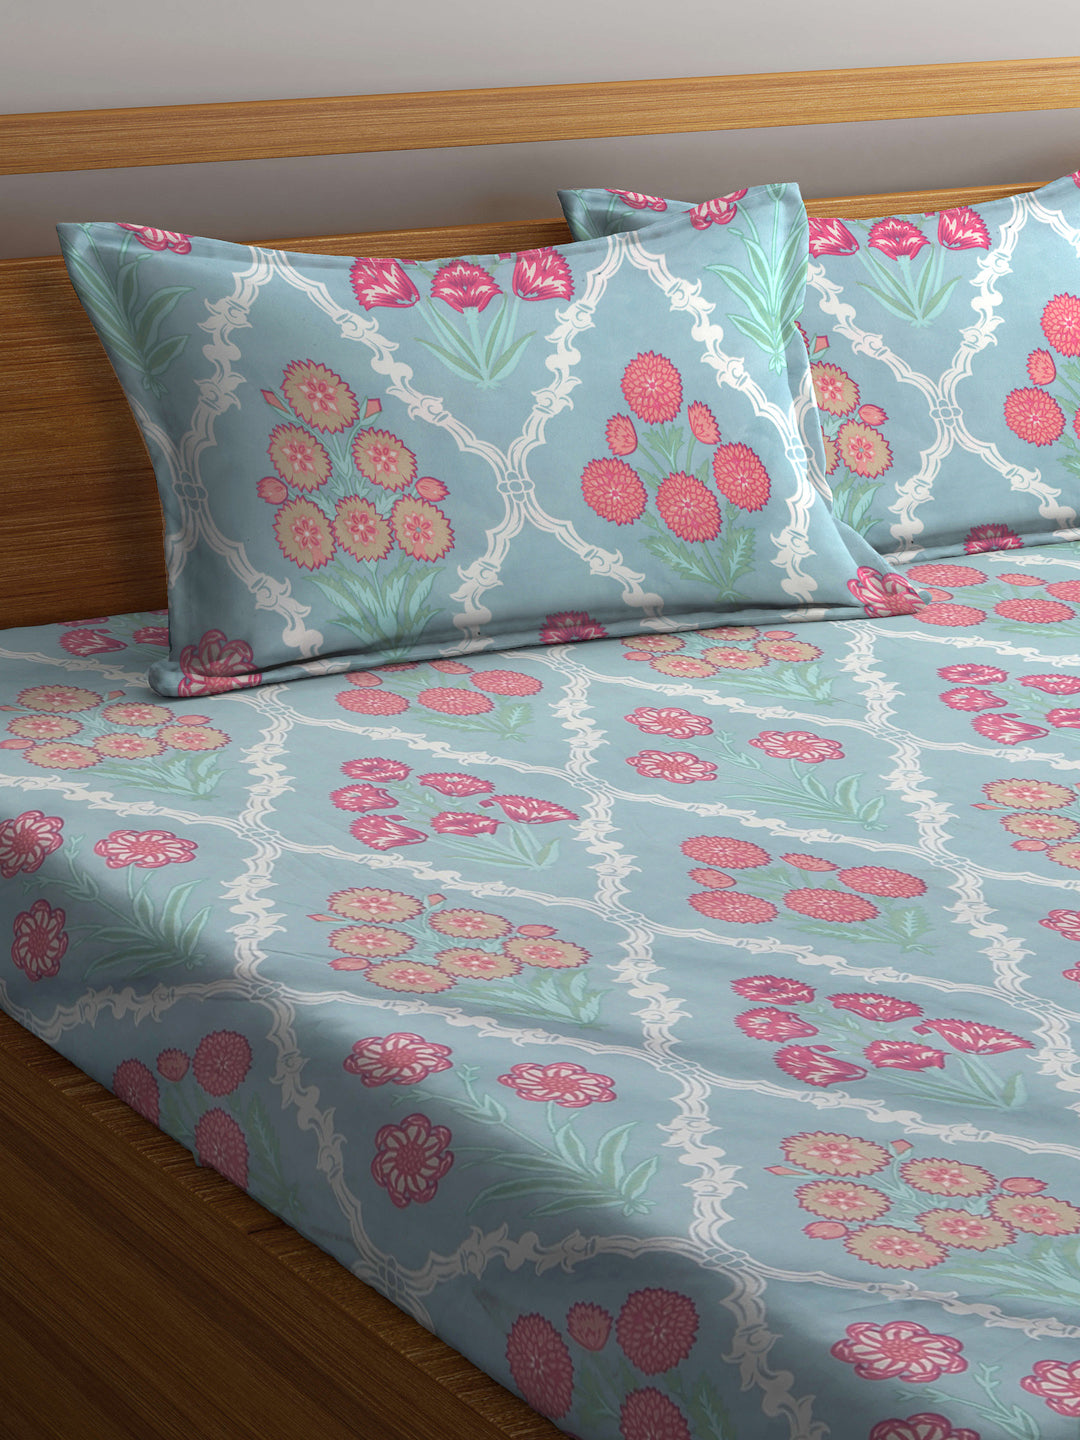 Klotthe Floral Skyblue 300 TC Cotton Blend Elasticated Double Bedsheet with 2 Pillow covers (270X270 cm)